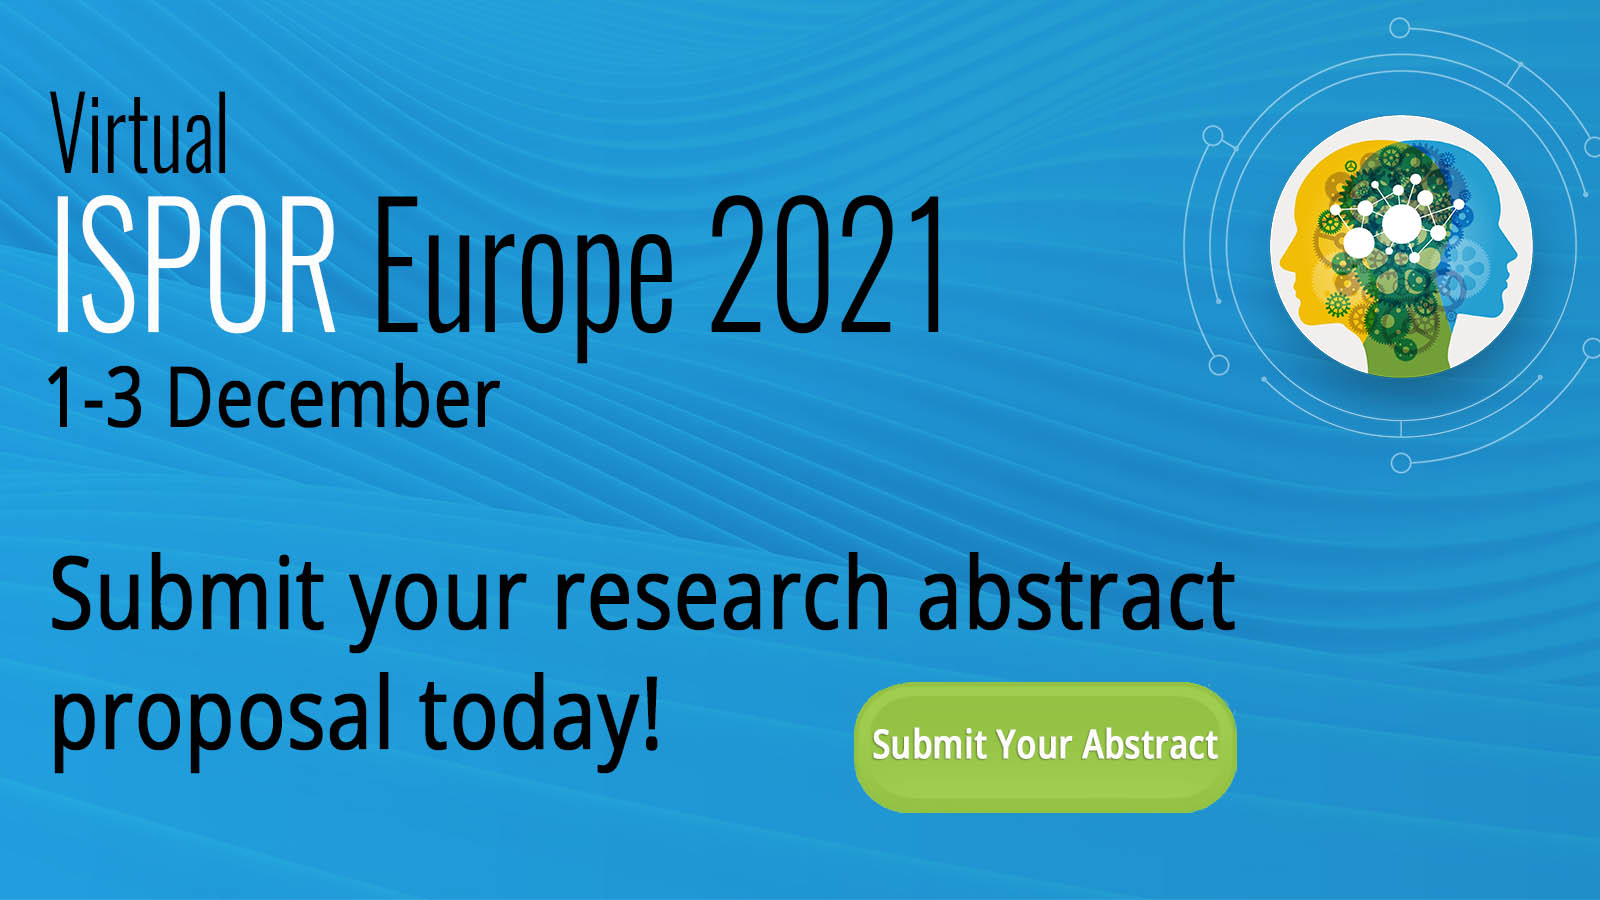 ISPOR on Twitter "Research abstract submissions are now open for